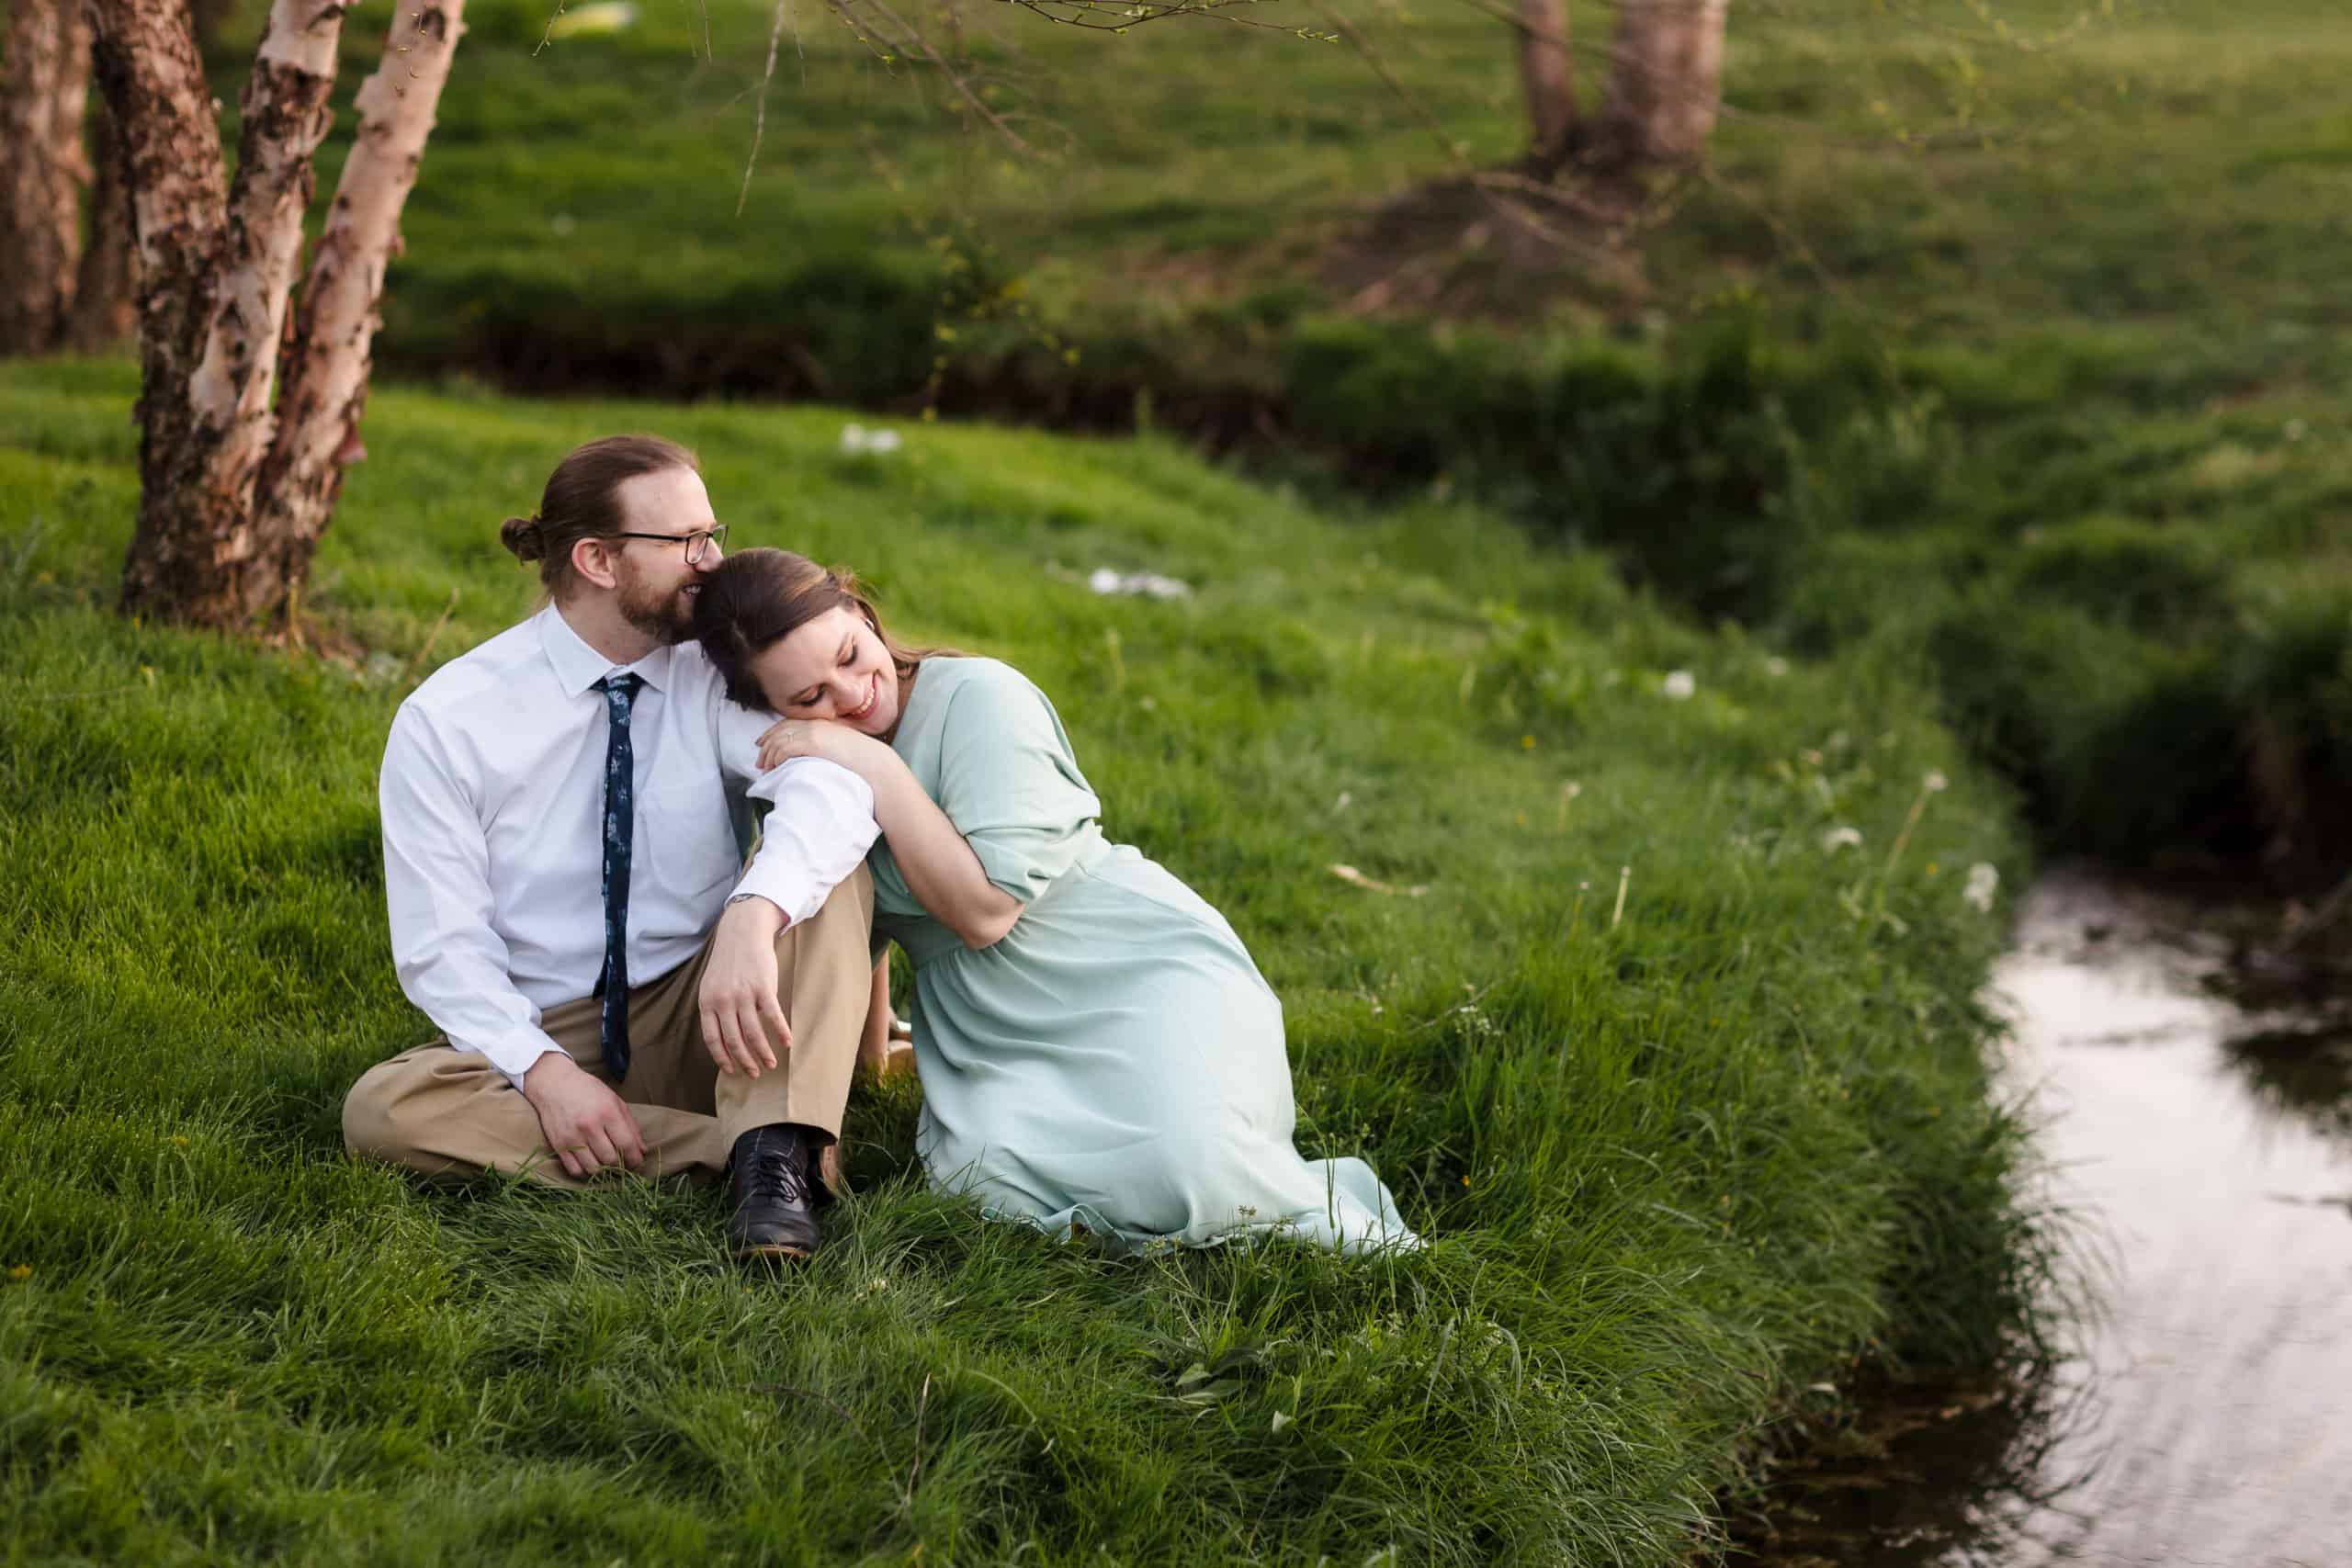 Leanna & Sean - Happy Spring Engagement Session at Dogwood Park in Cookeville TN